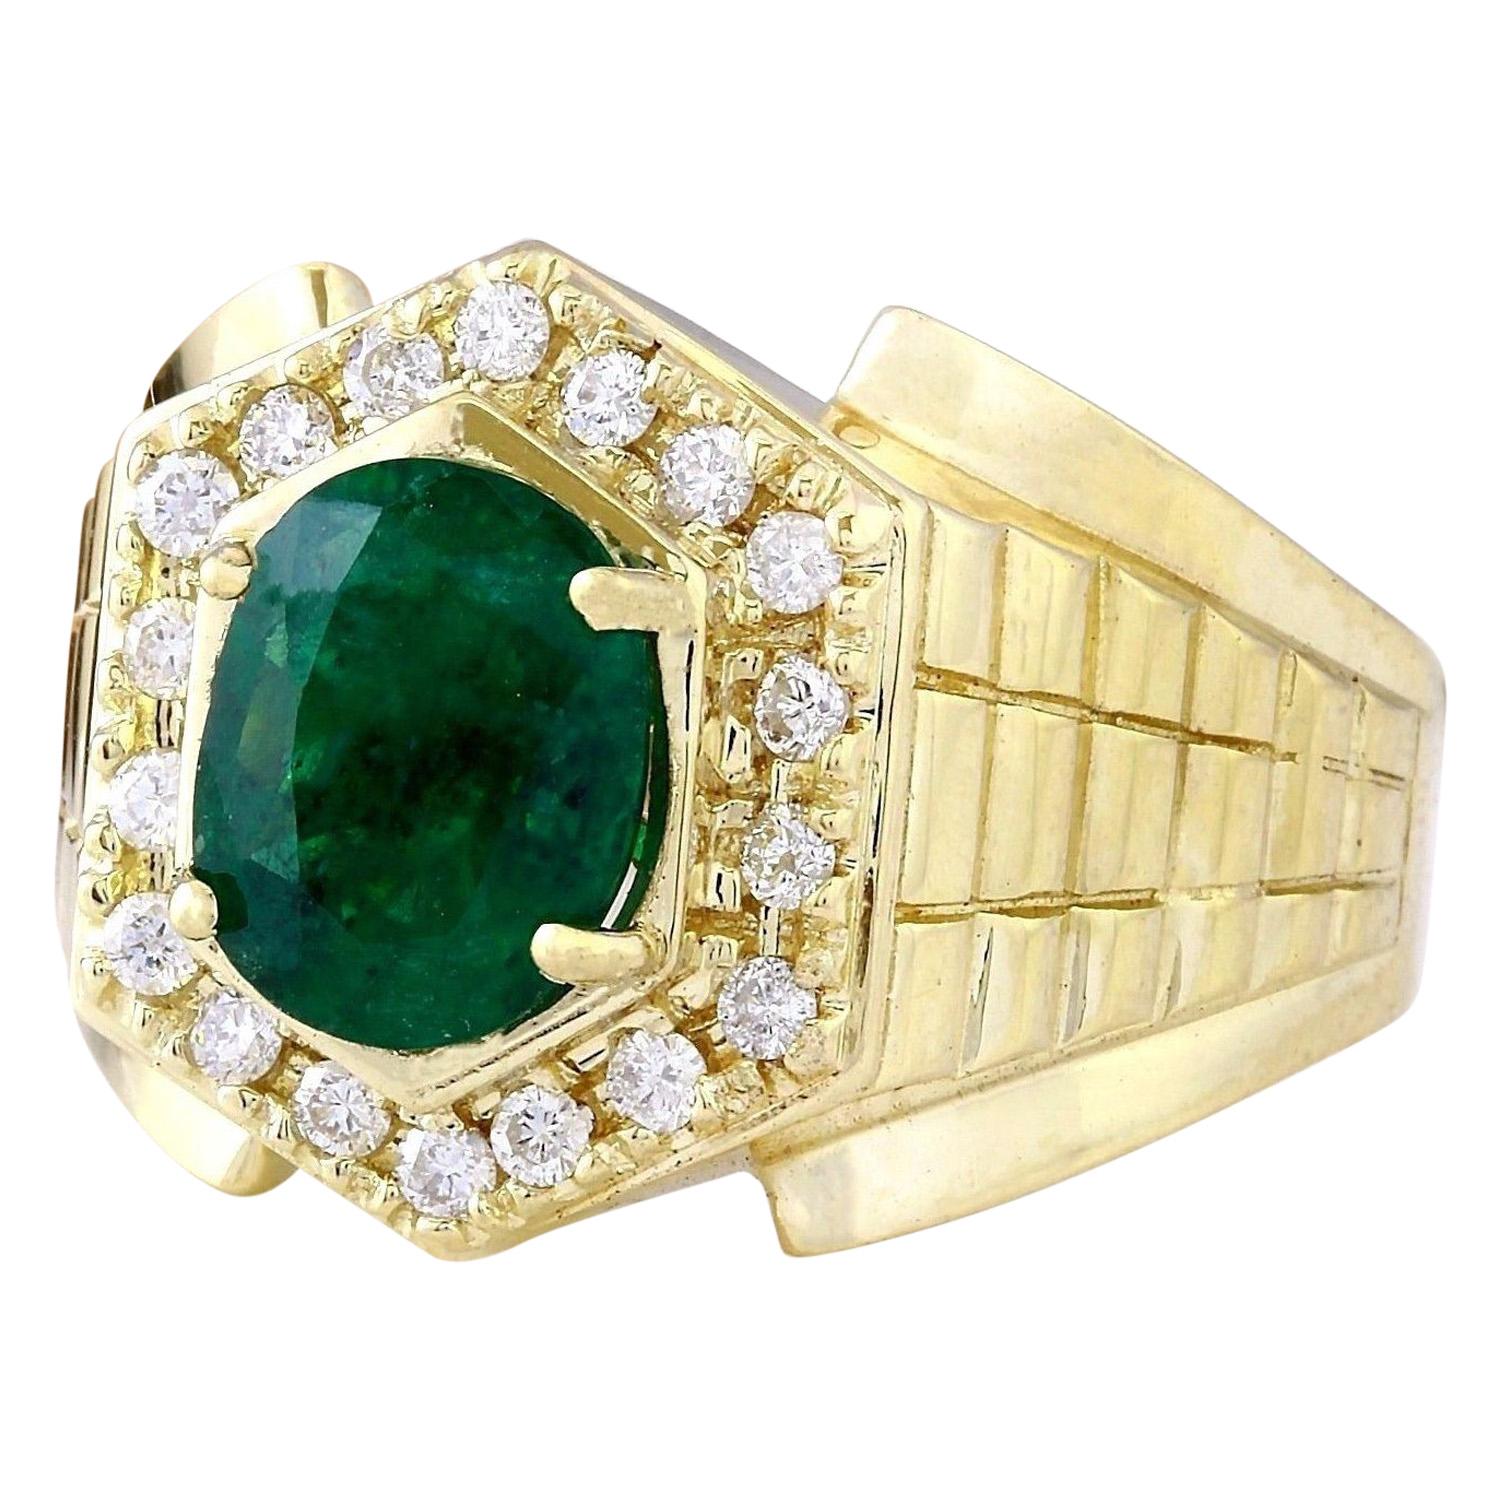 3.45 Carat Natural Emerald 14K Solid Yellow Gold Diamond Ring
 Item Type: Ring
 Material: 14K Yellow Gold
 Mainstone: Emerald
 Stone Color: Green
 Stone Weight: 2.85 Carat
 Stone Shape: Oval
 Stone Quantity: 1
 Stone Dimensions: 10.00x8.00 mm
 Stone